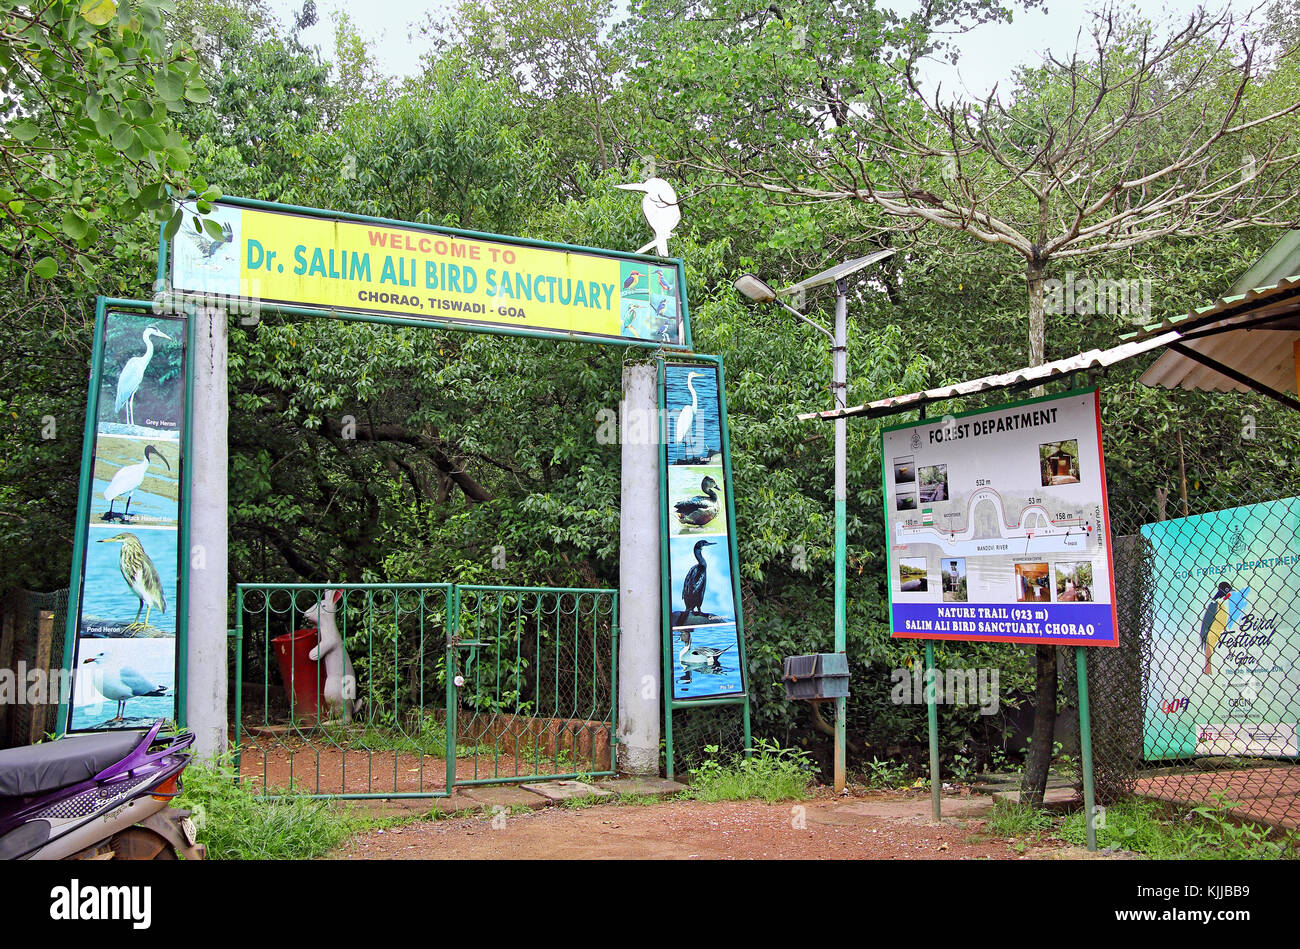 Entrance to nature trail through mangrove forest at Dr. Salim Ali Bird Sanctuary in Chorao Island, Goa, India. The entrance is next to Chorao jetty Stock Photo